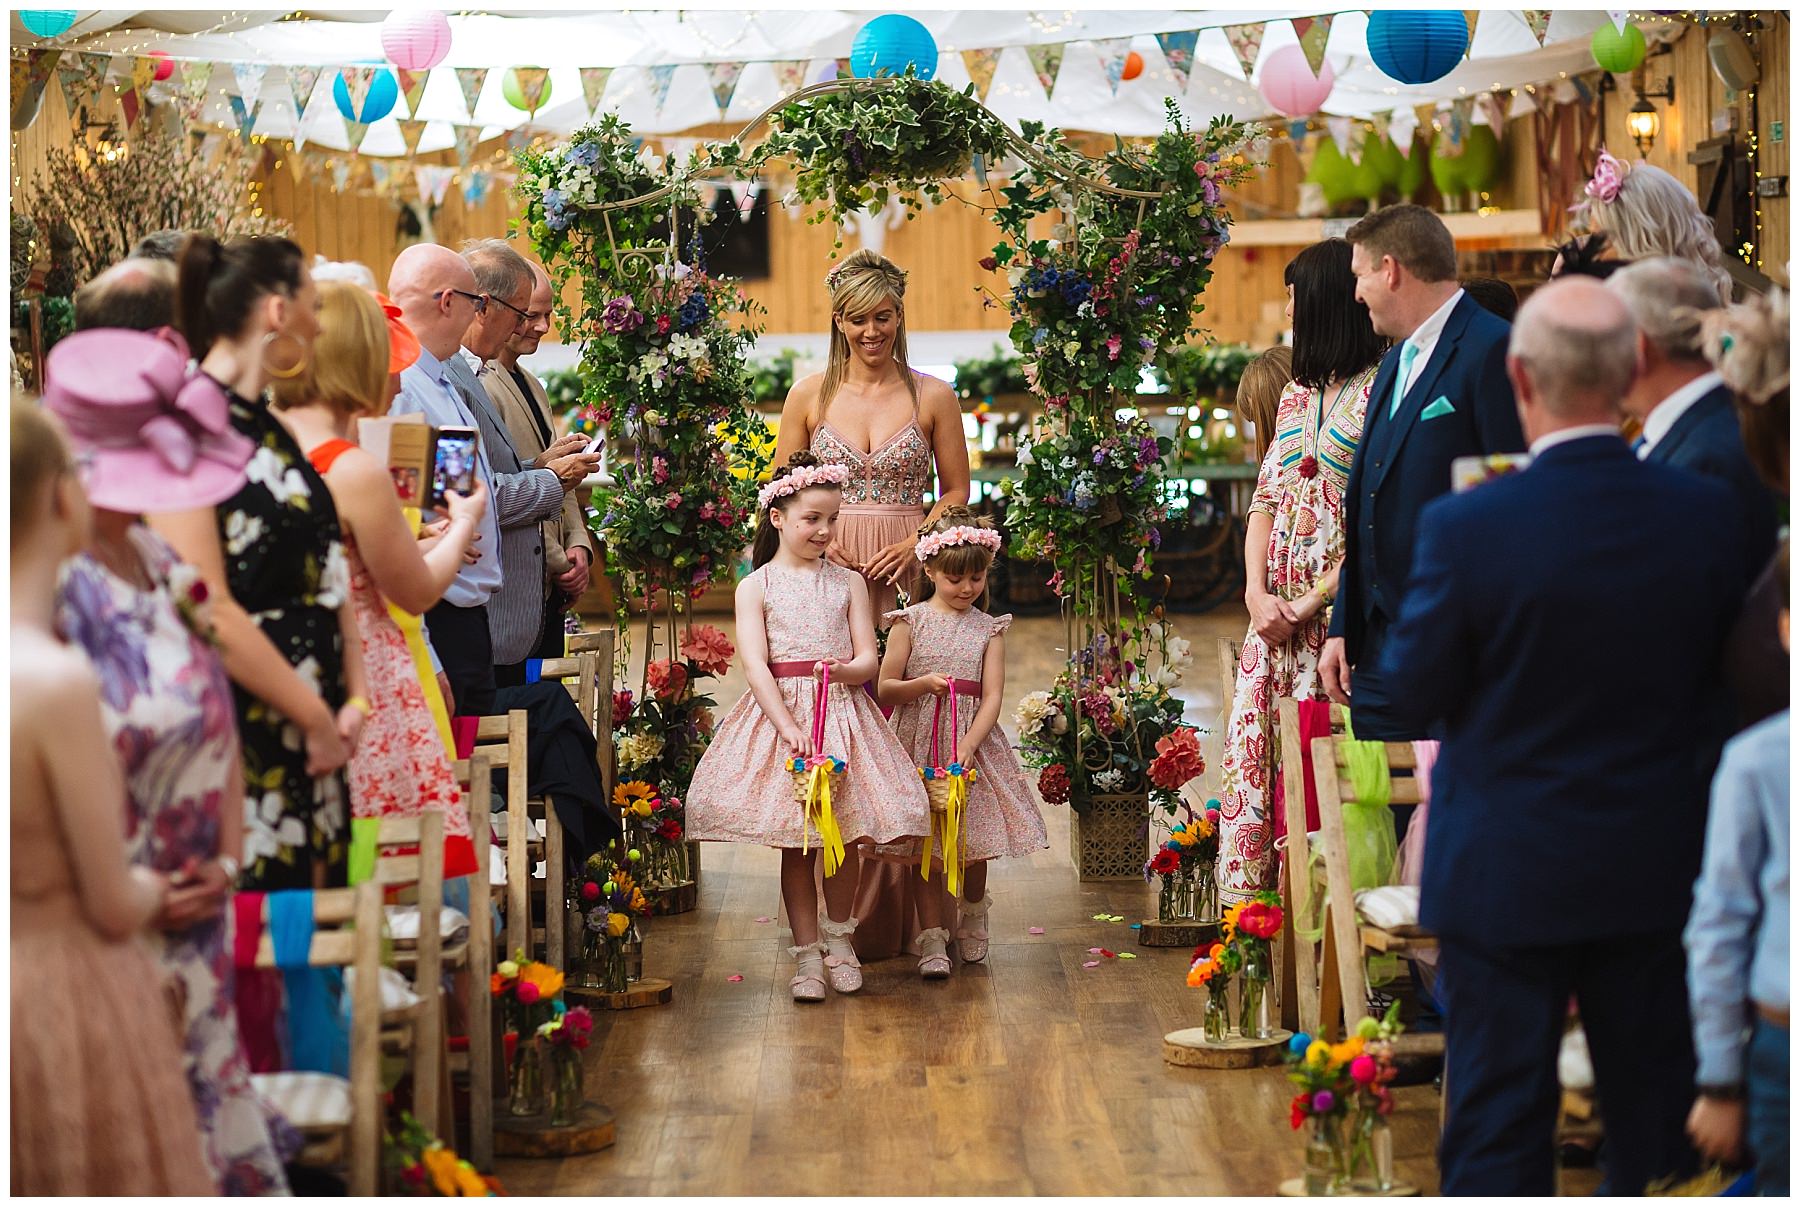 flowergirls and bridesmaid arrive at the wellbeing farm